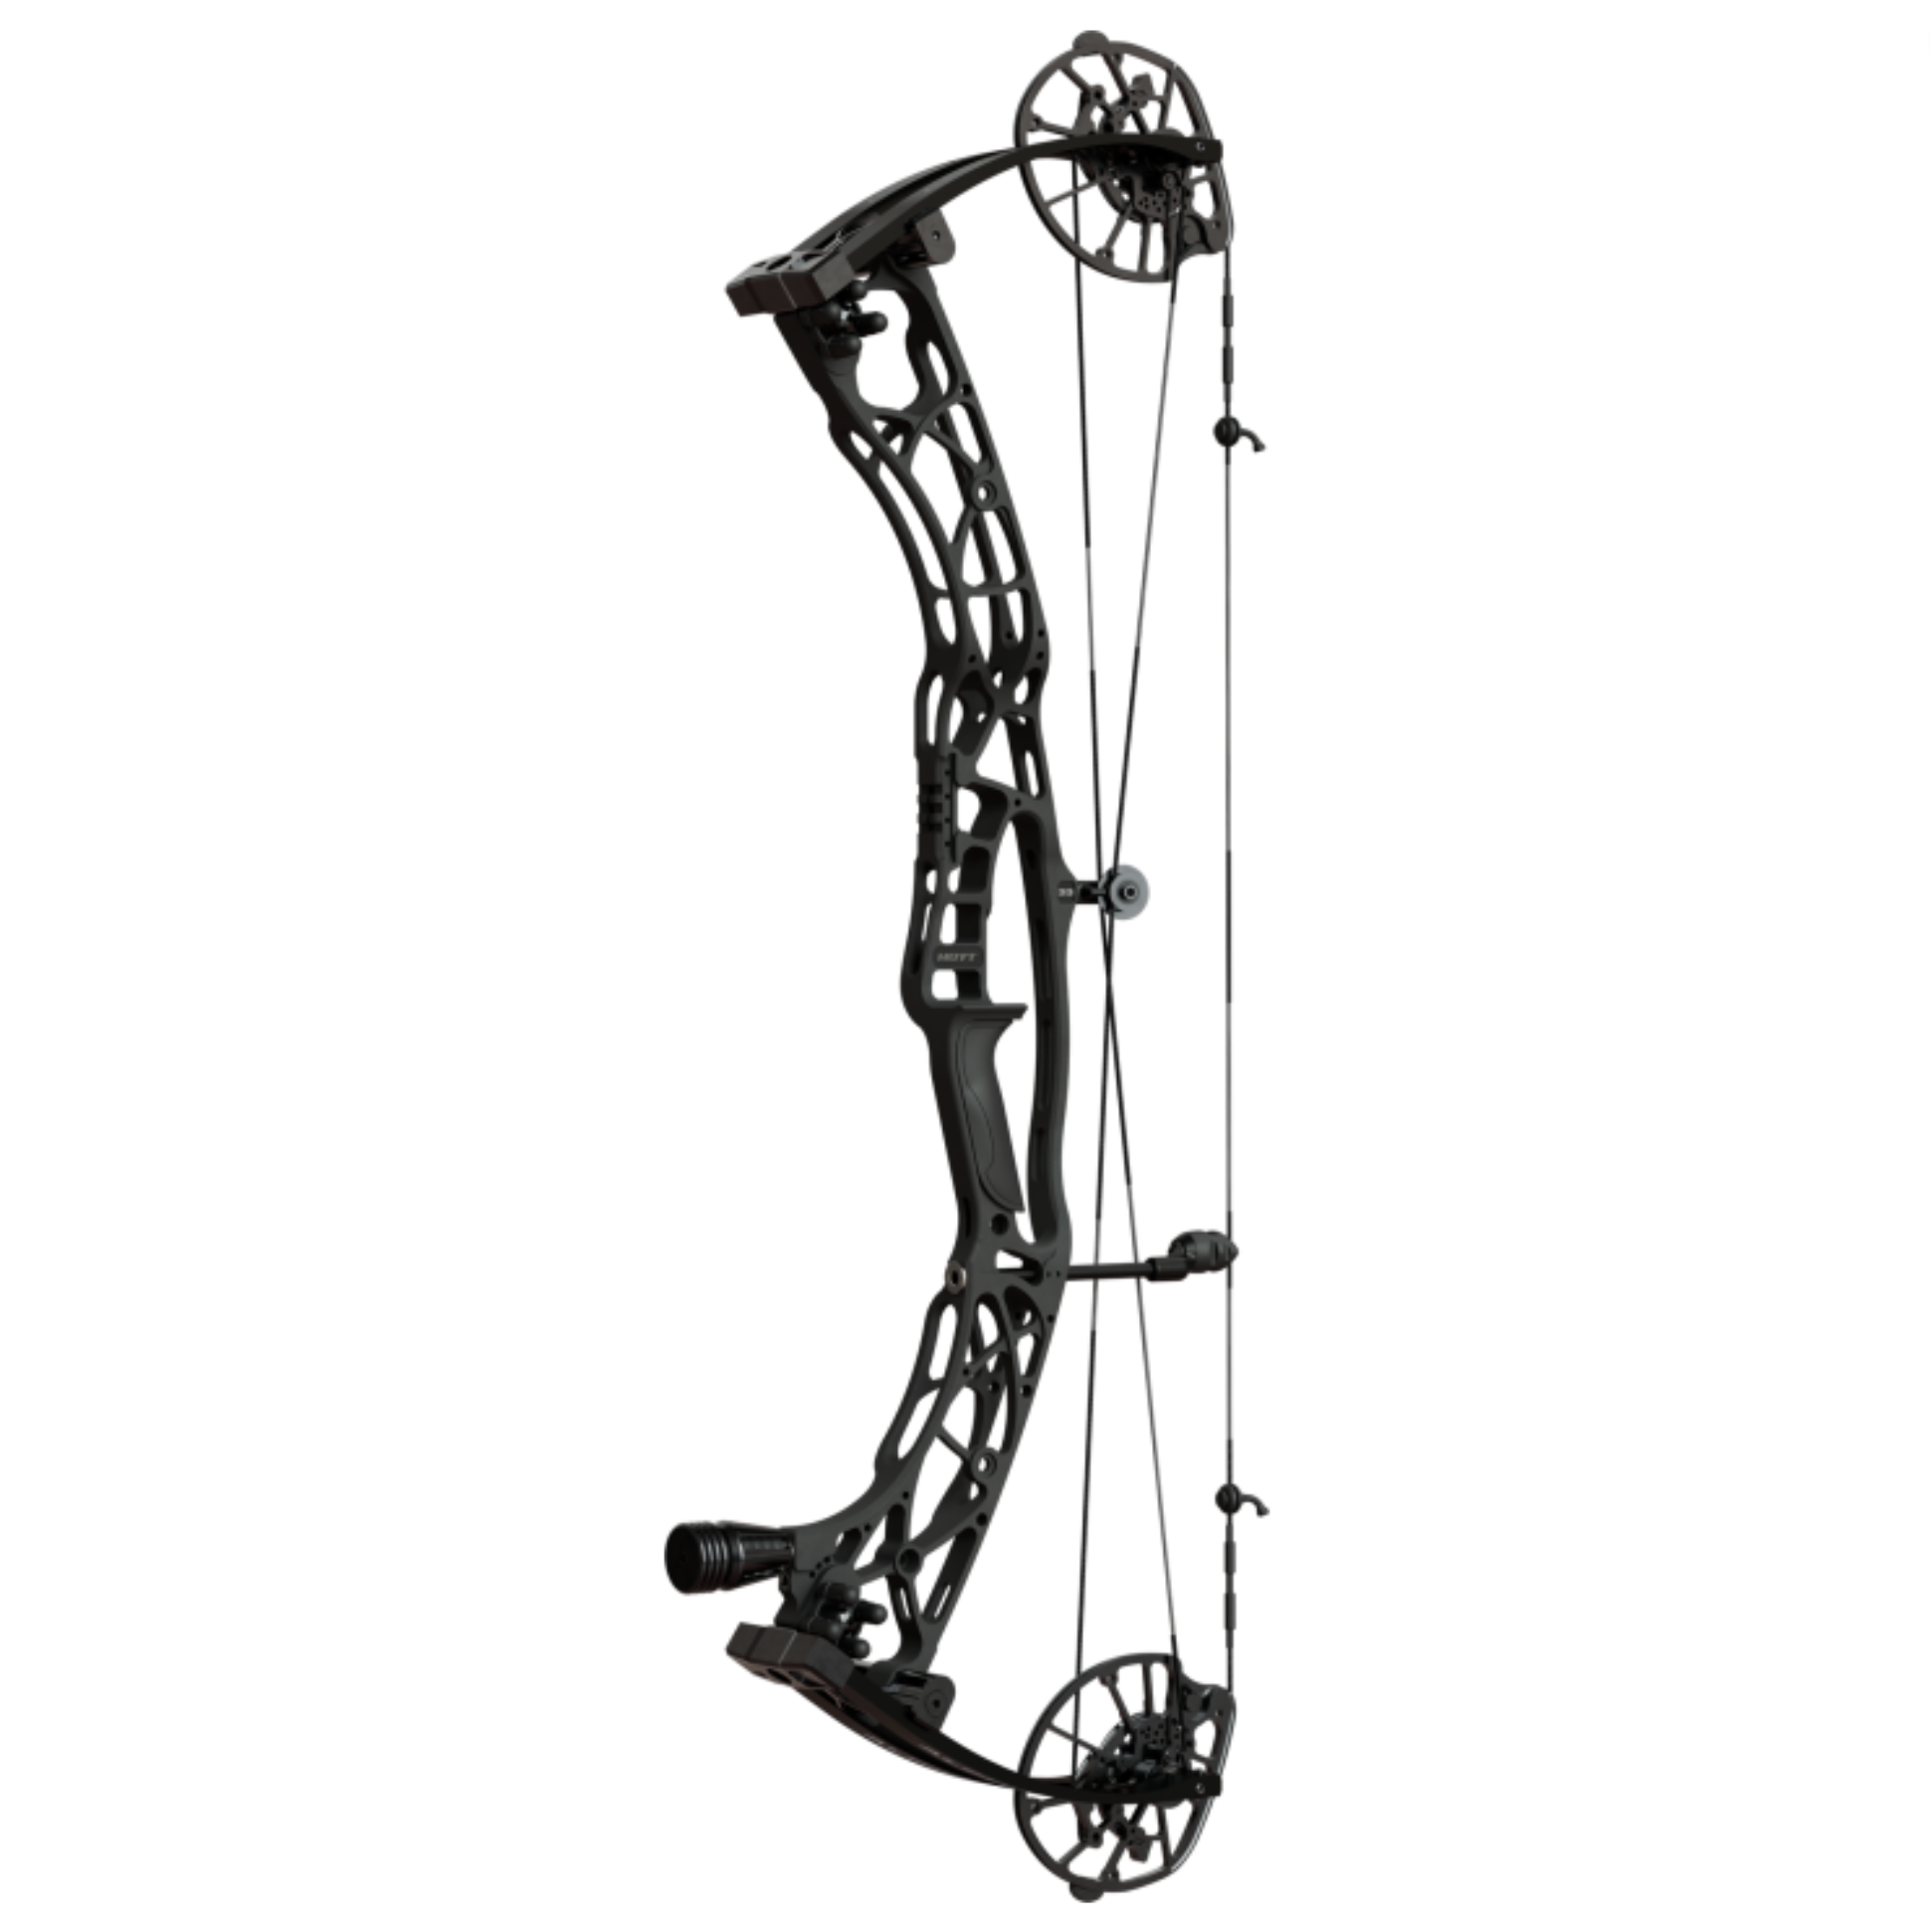 Hoyt Alpha X 33 Compound Hunting Bow